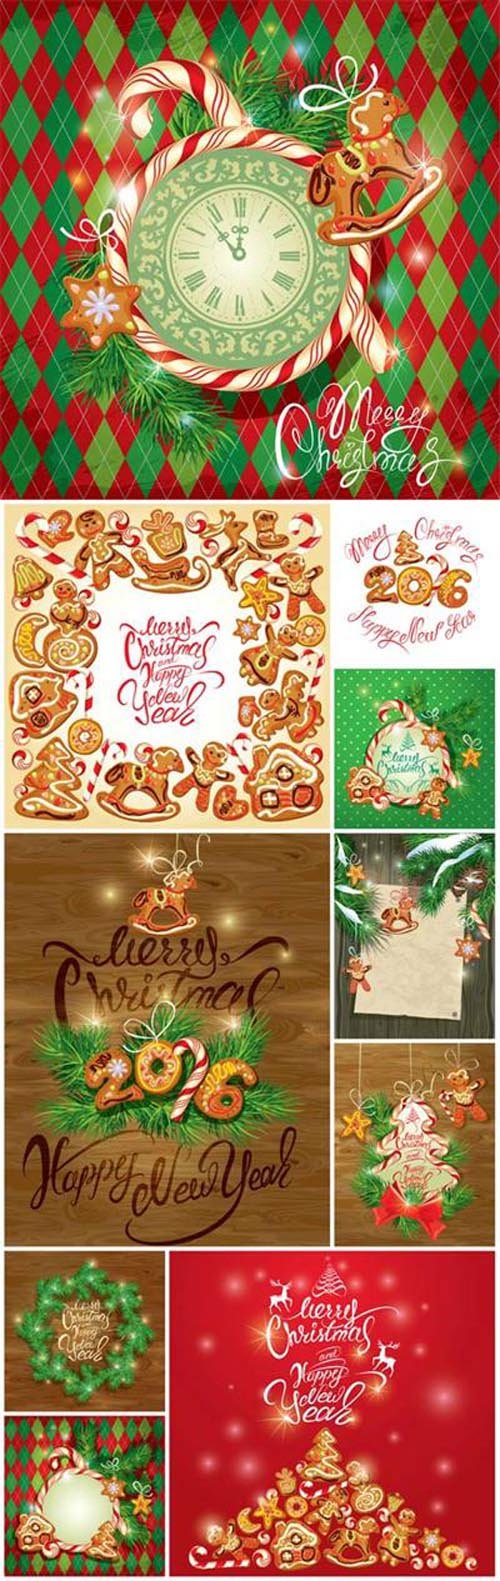 New year holiday greeting card with christmas gingerbread